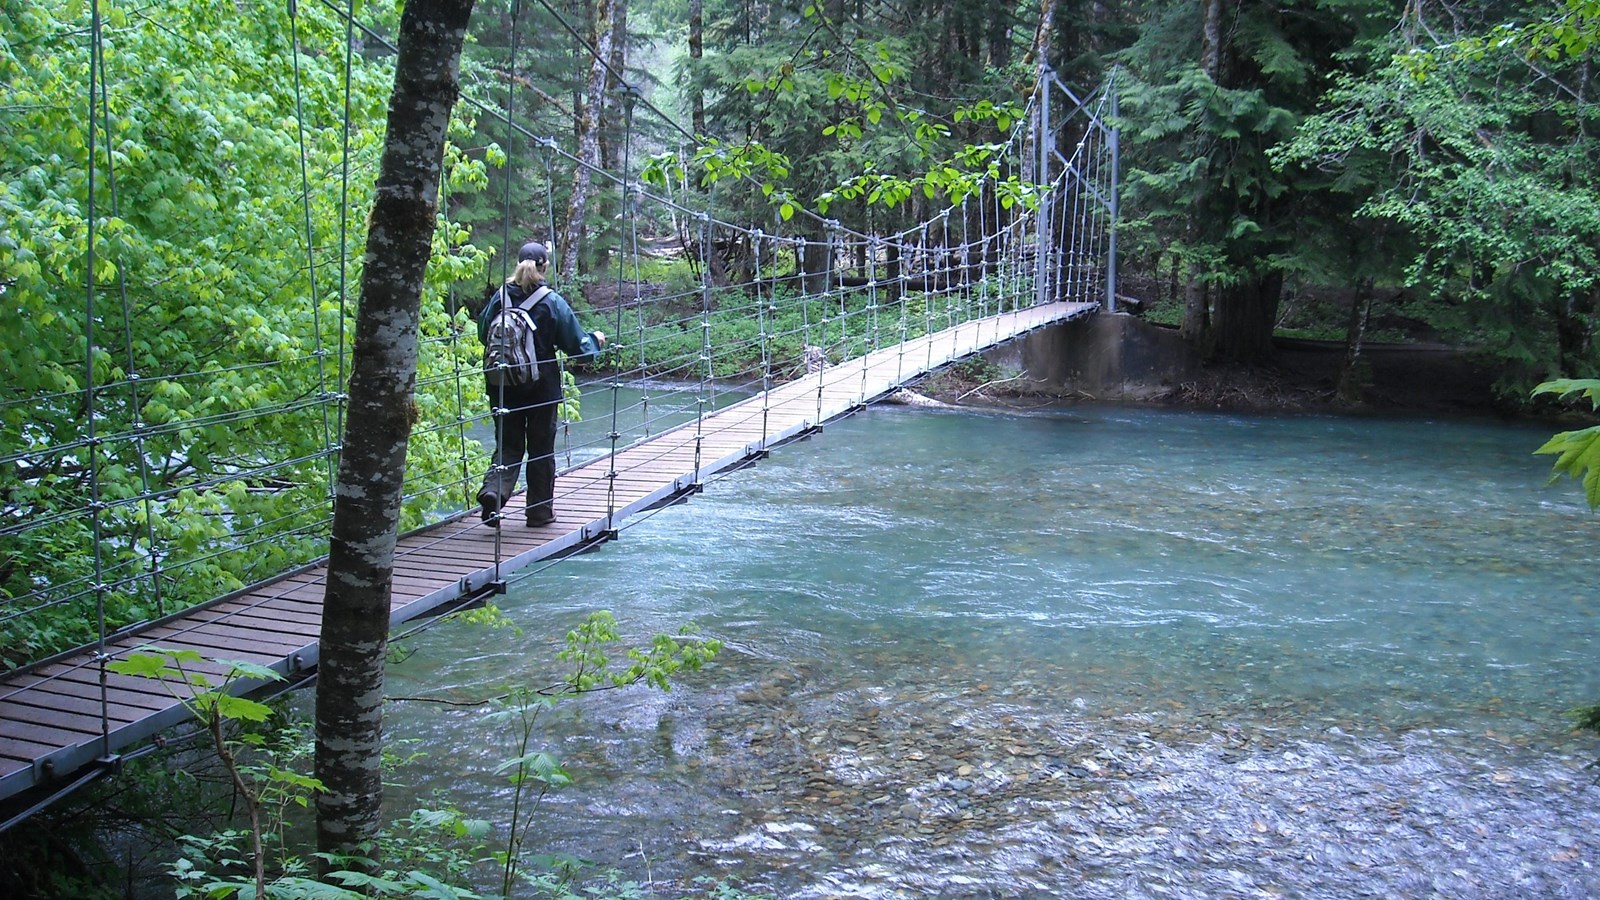 A hiker walks across a suspension bridge in the forest above bright blue water.